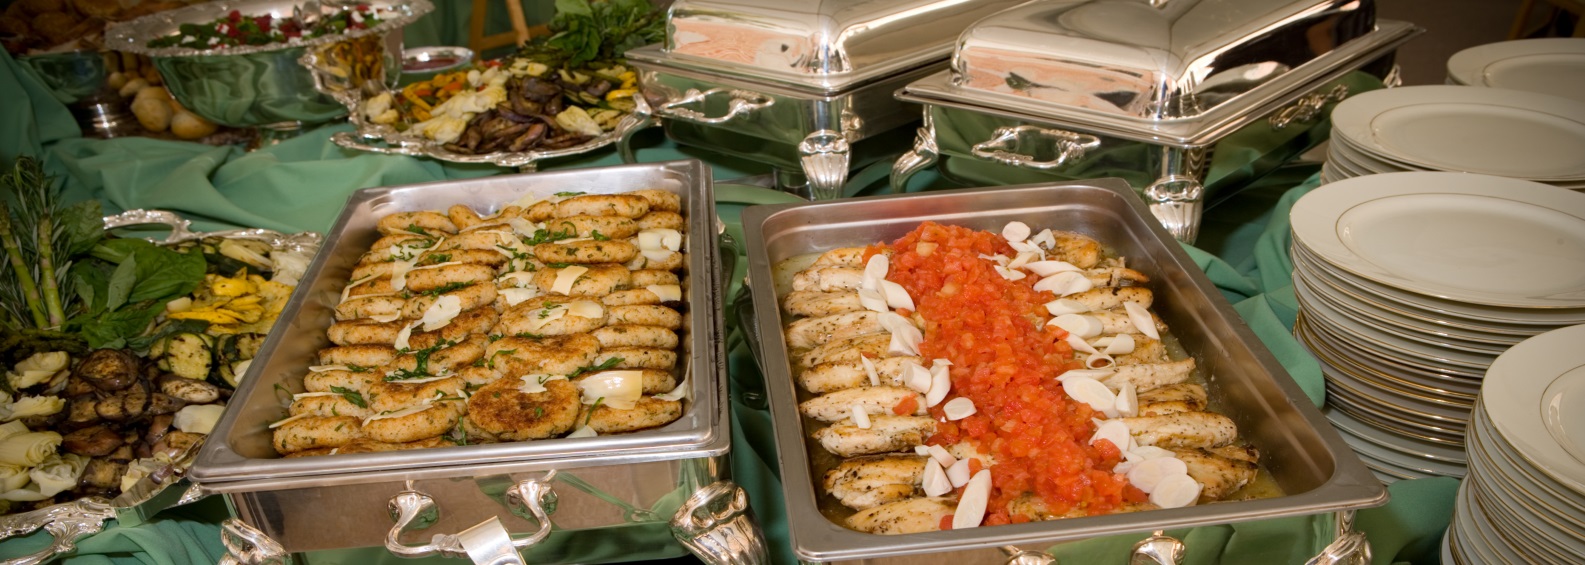 houston corporate catering